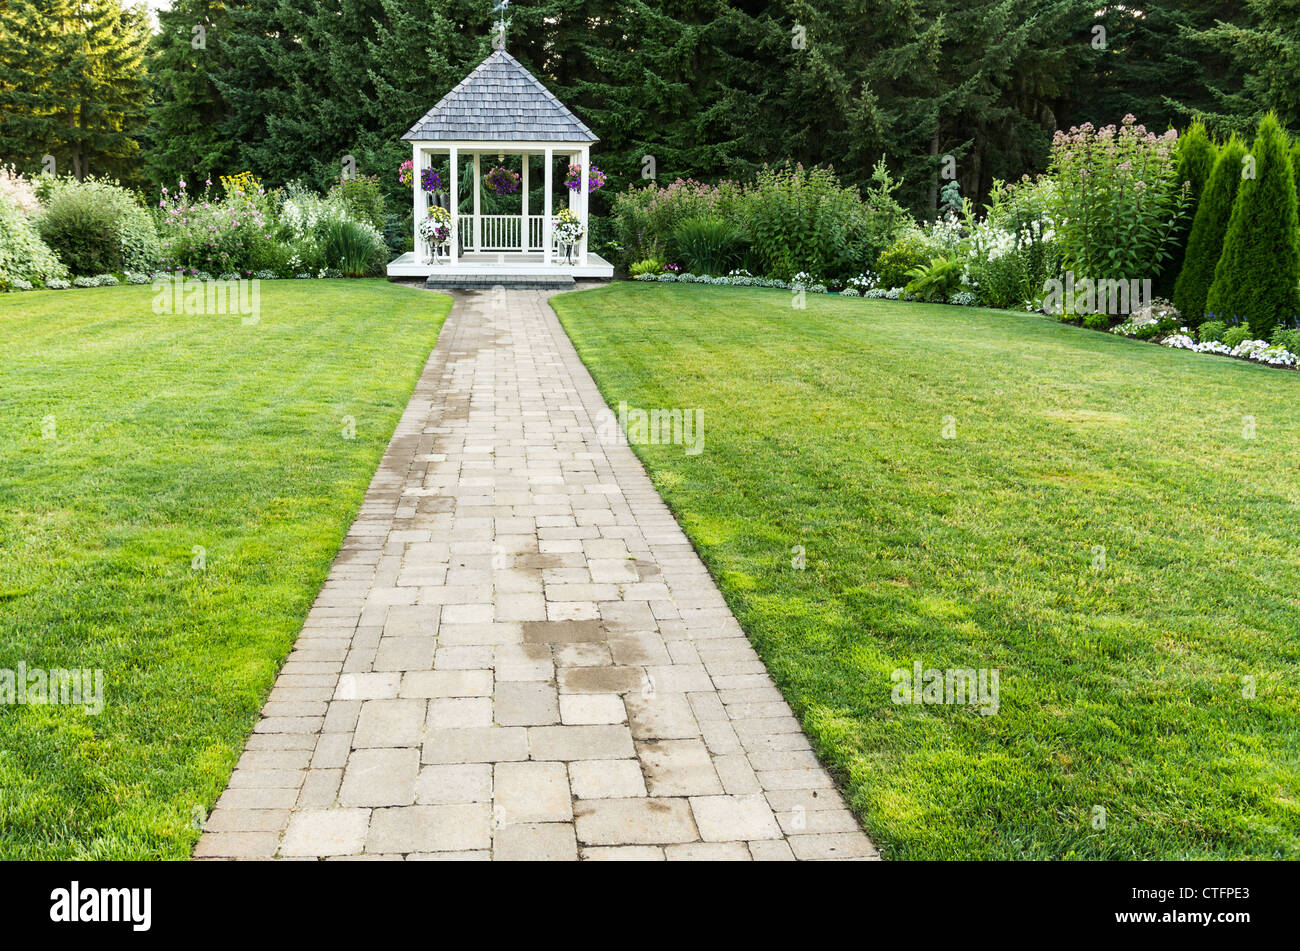 A white wedding gazebo on green lawn at the end of a stone pathway Stock Photo